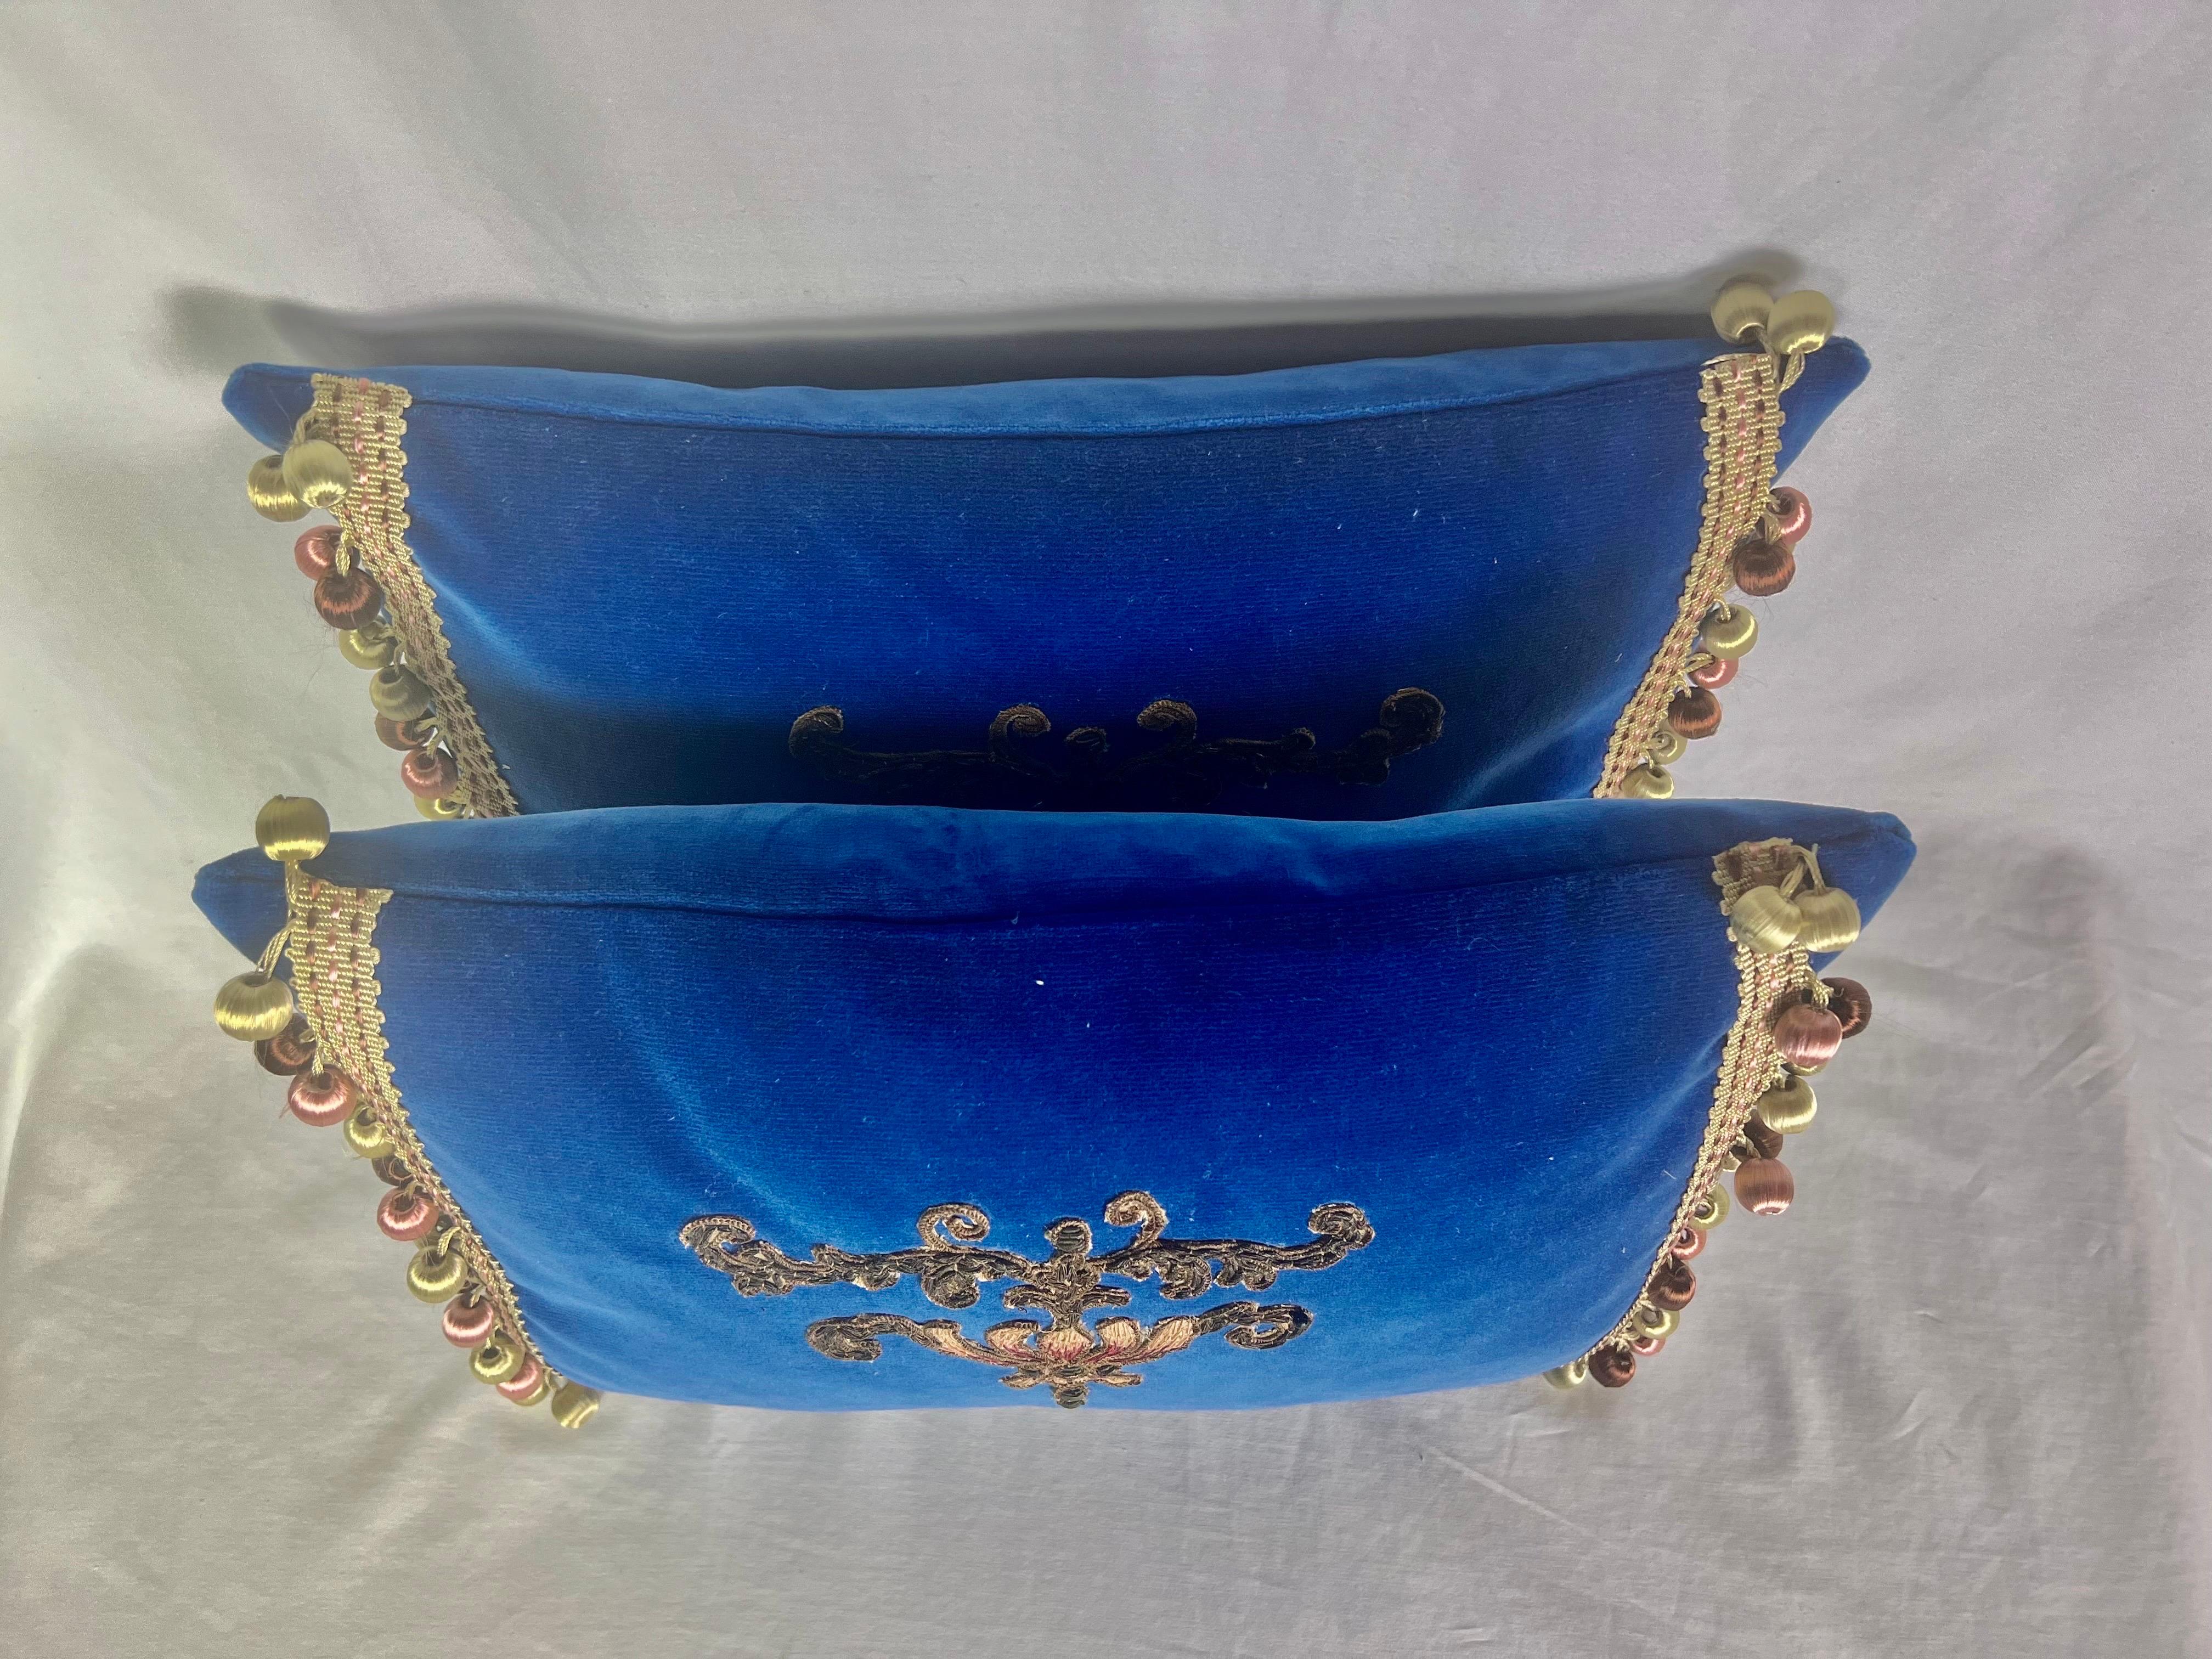 Blue Velvet Appliqué Accent Piilows by Melissa Levinson In Excellent Condition For Sale In Los Angeles, CA